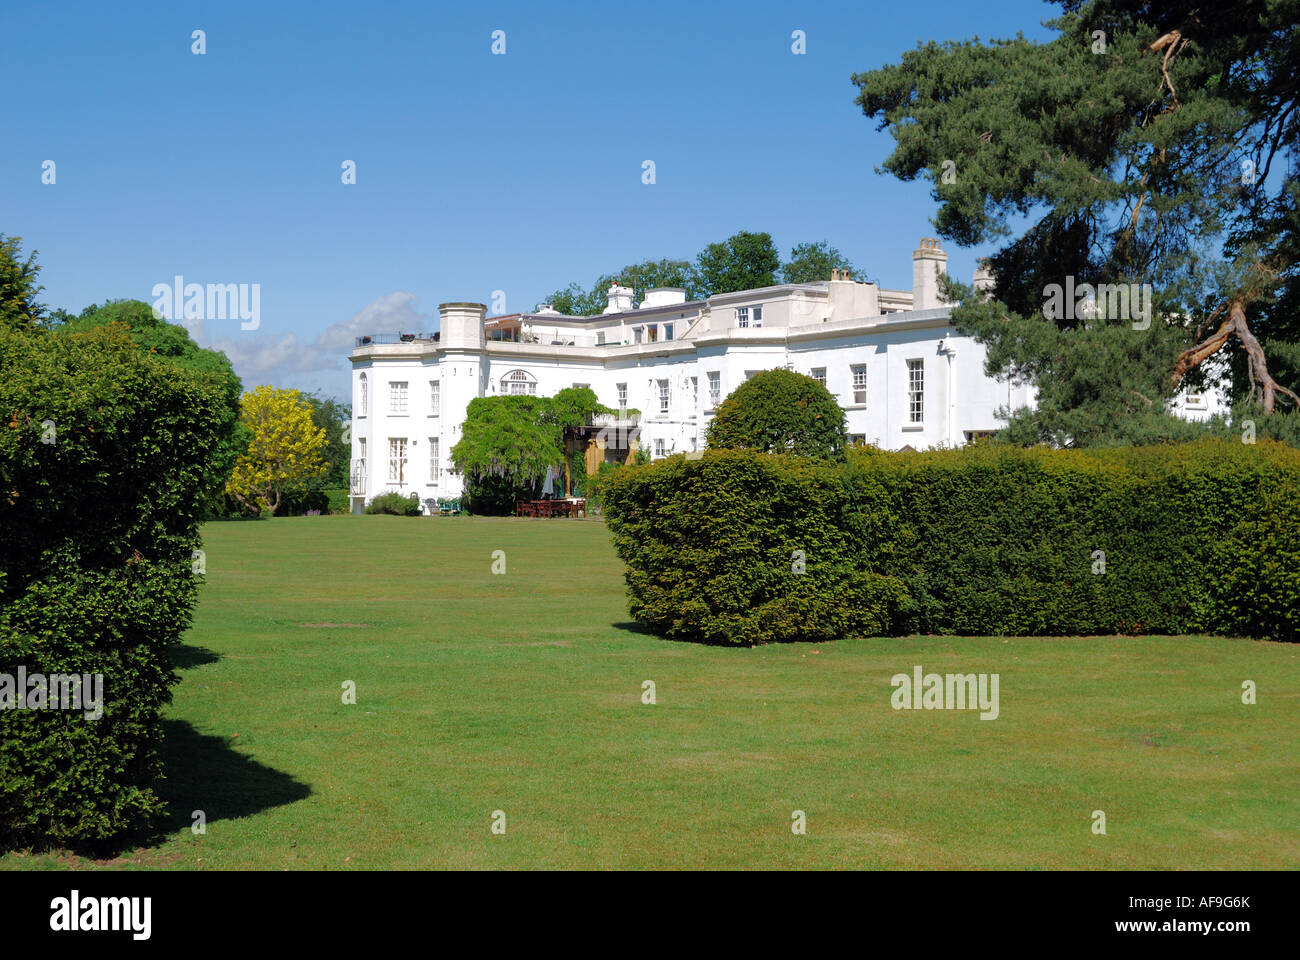 Period Queen Anne manor house, Virginia Water, Surrey, England, United Kingdom Stock Photo